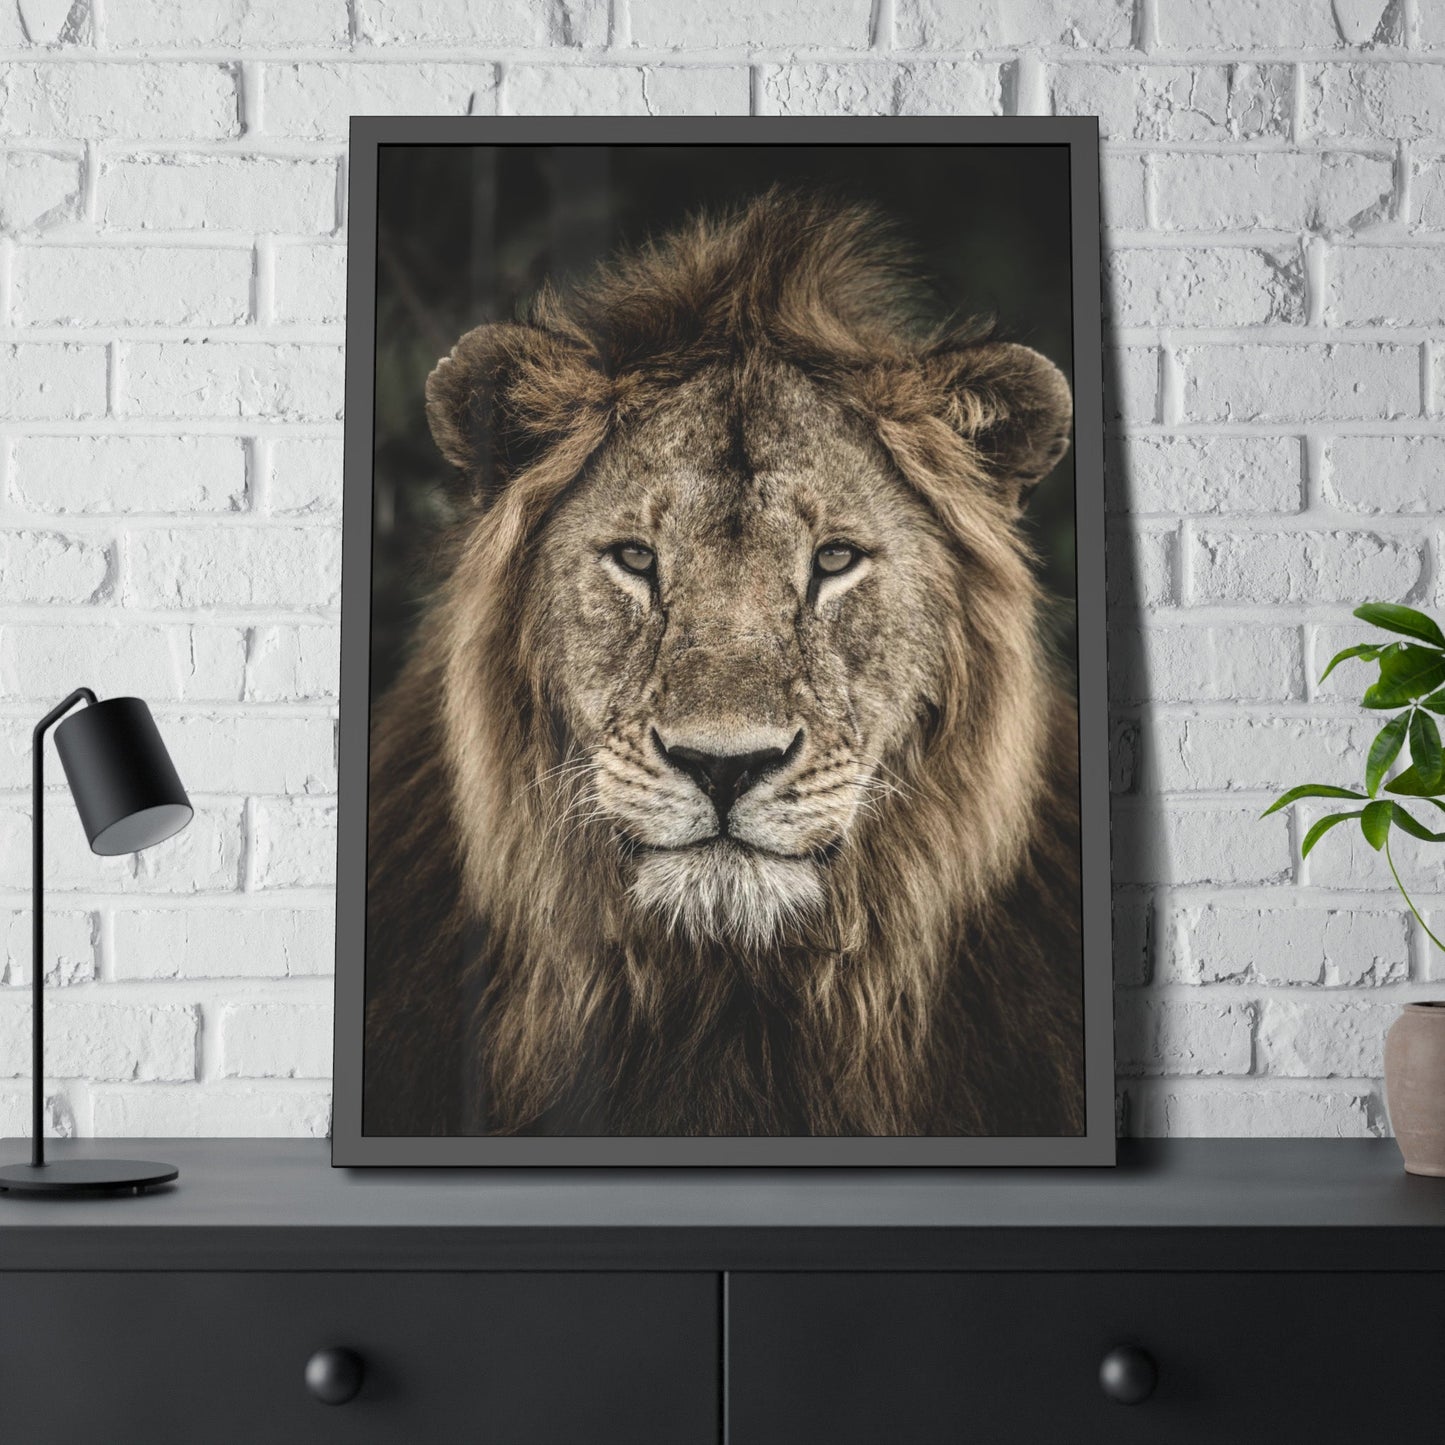 Lion's Strength: Canvas Print of the Fierce Predator in Action